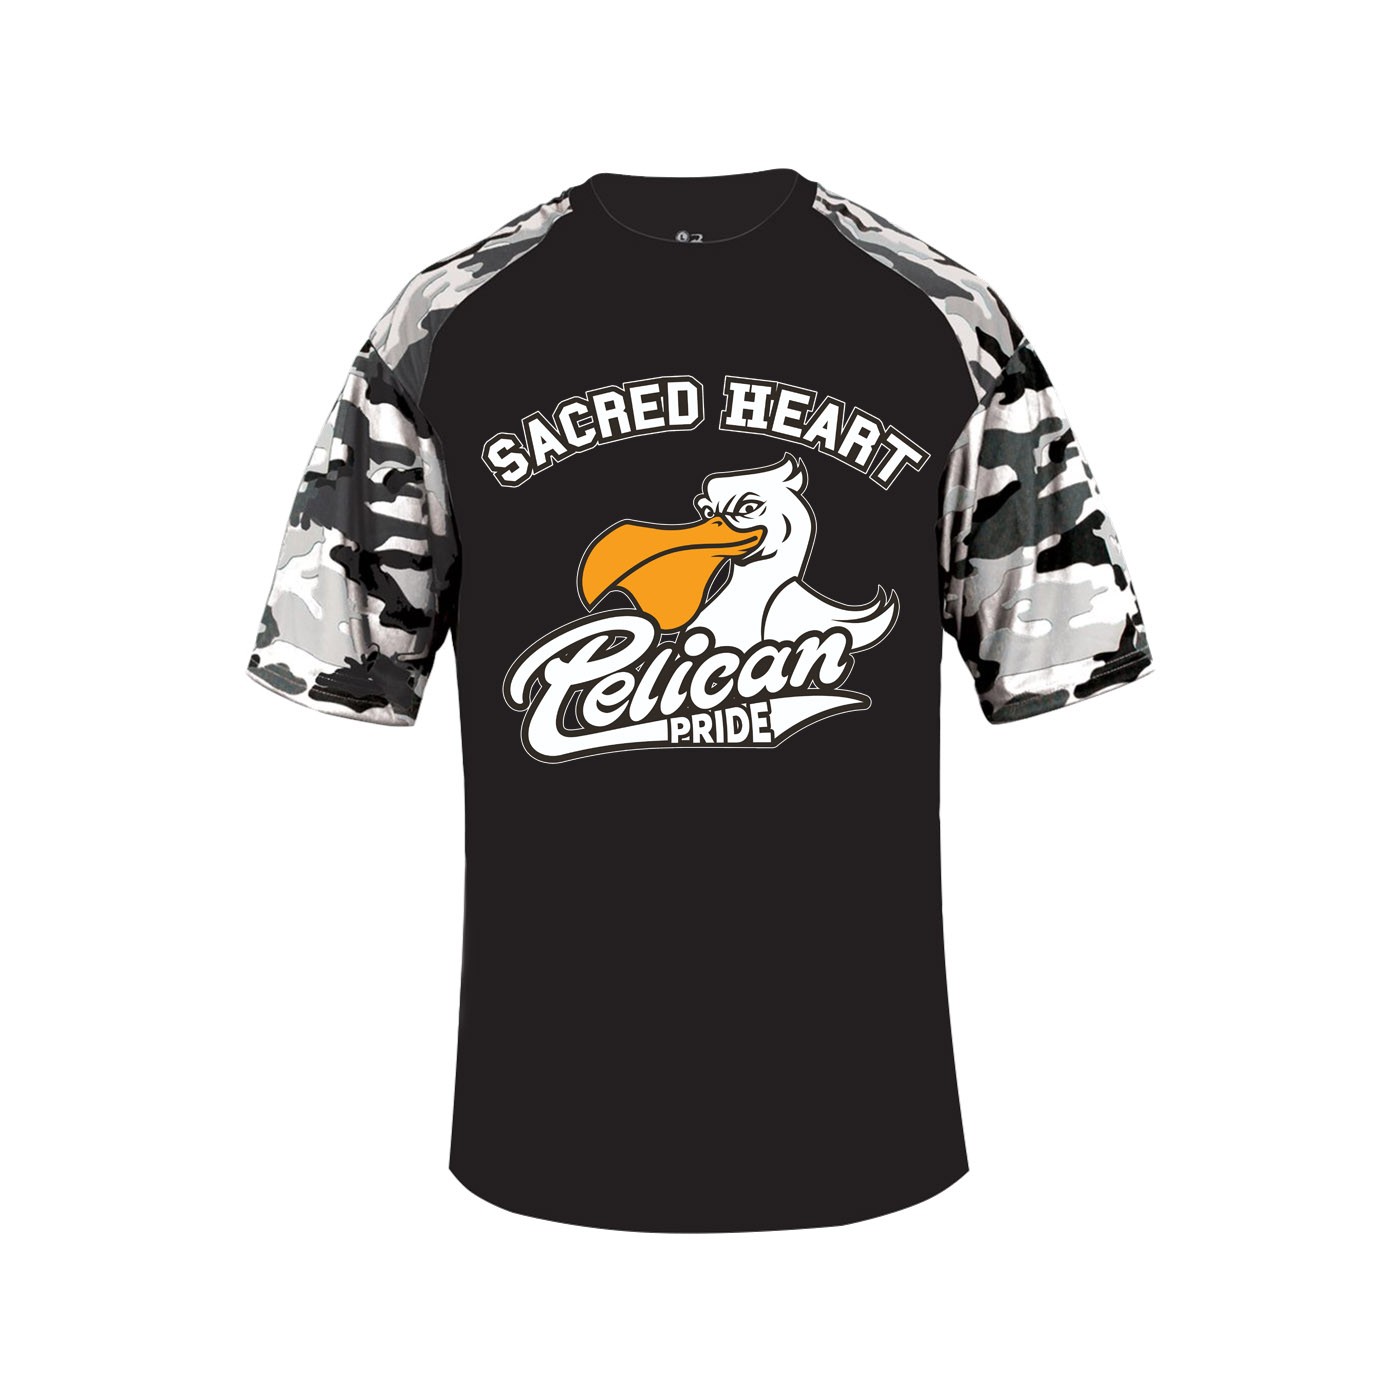 SHS Spirit Pelican Pride S/S Camo T-Shirt w/ Logo - Please Allow 2-3 Weeks for Delivery